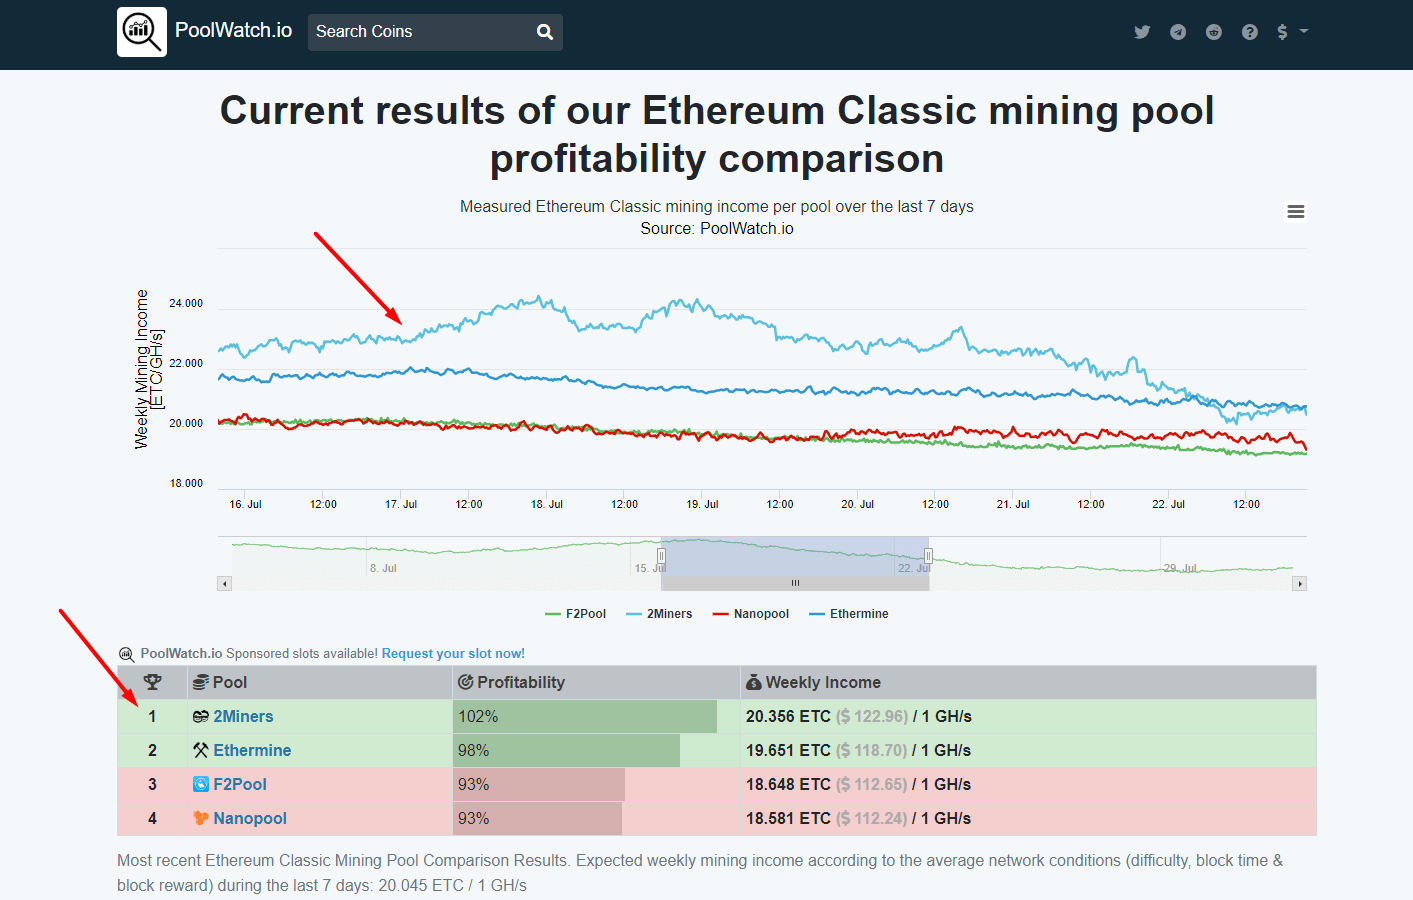 Best mining pool for ethereum classic premier league futures odds